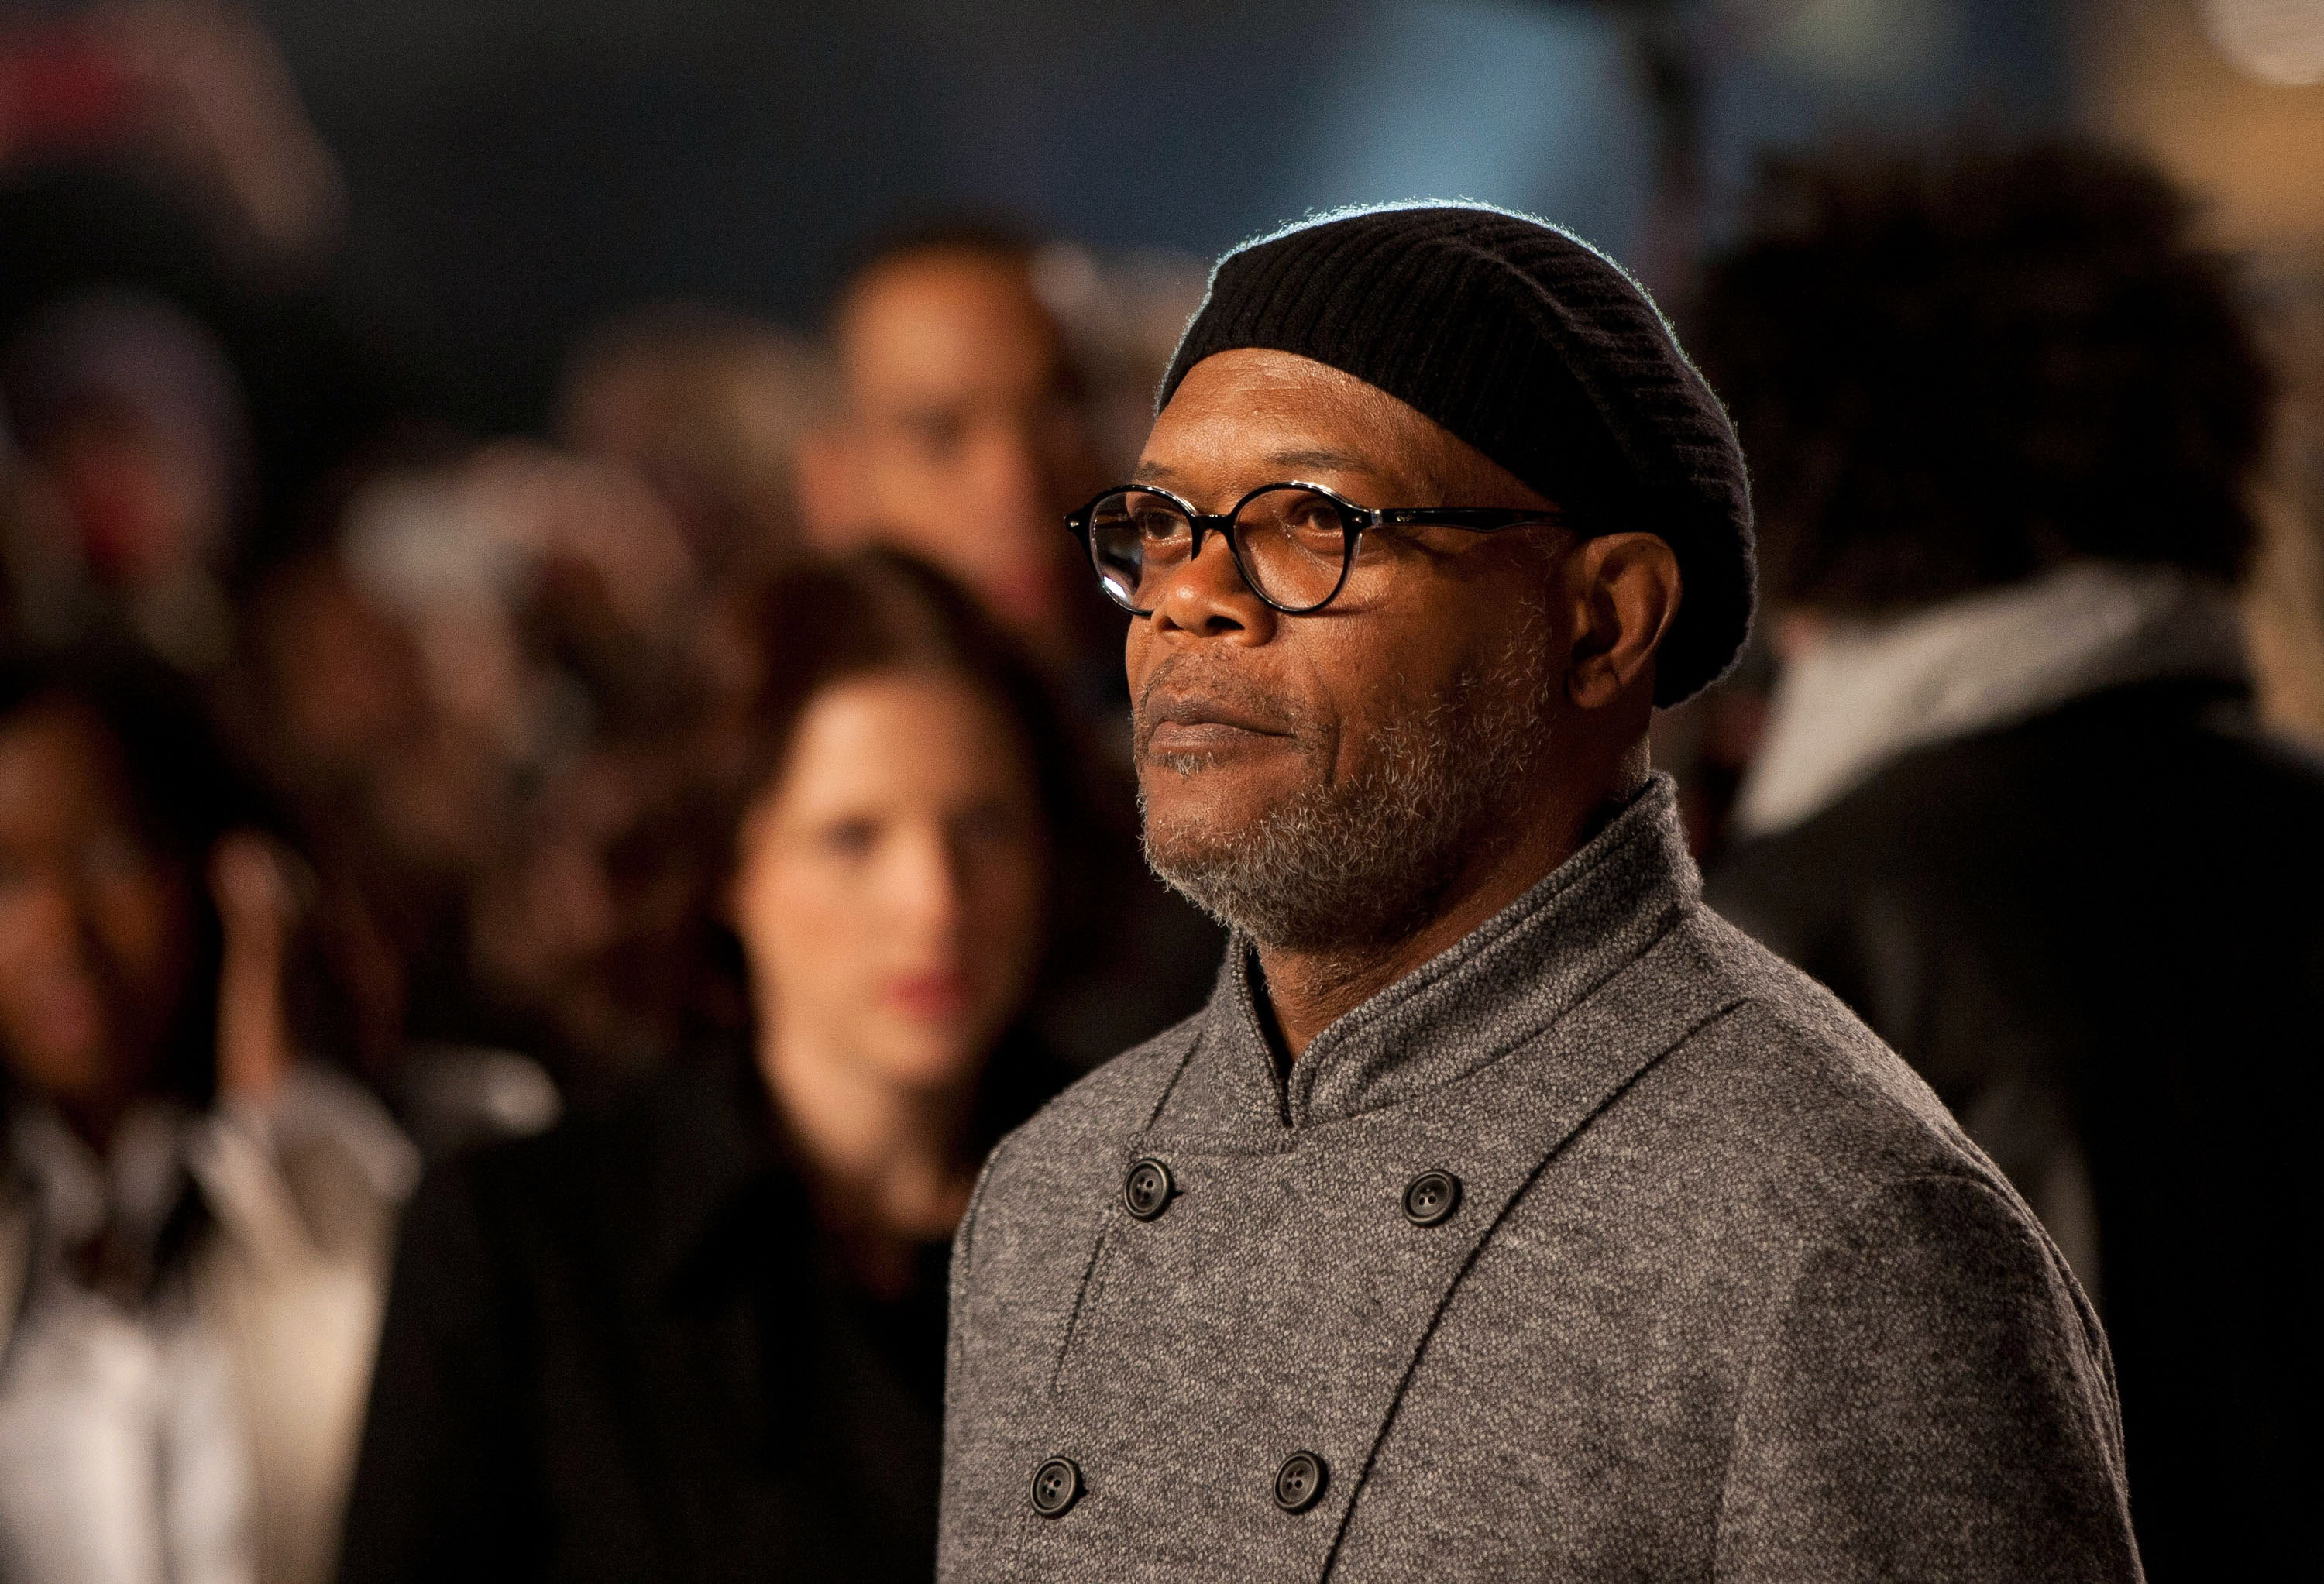 Samuel L. Jackson attends the UK premiere of Quentin Tarantino's Django Unchained